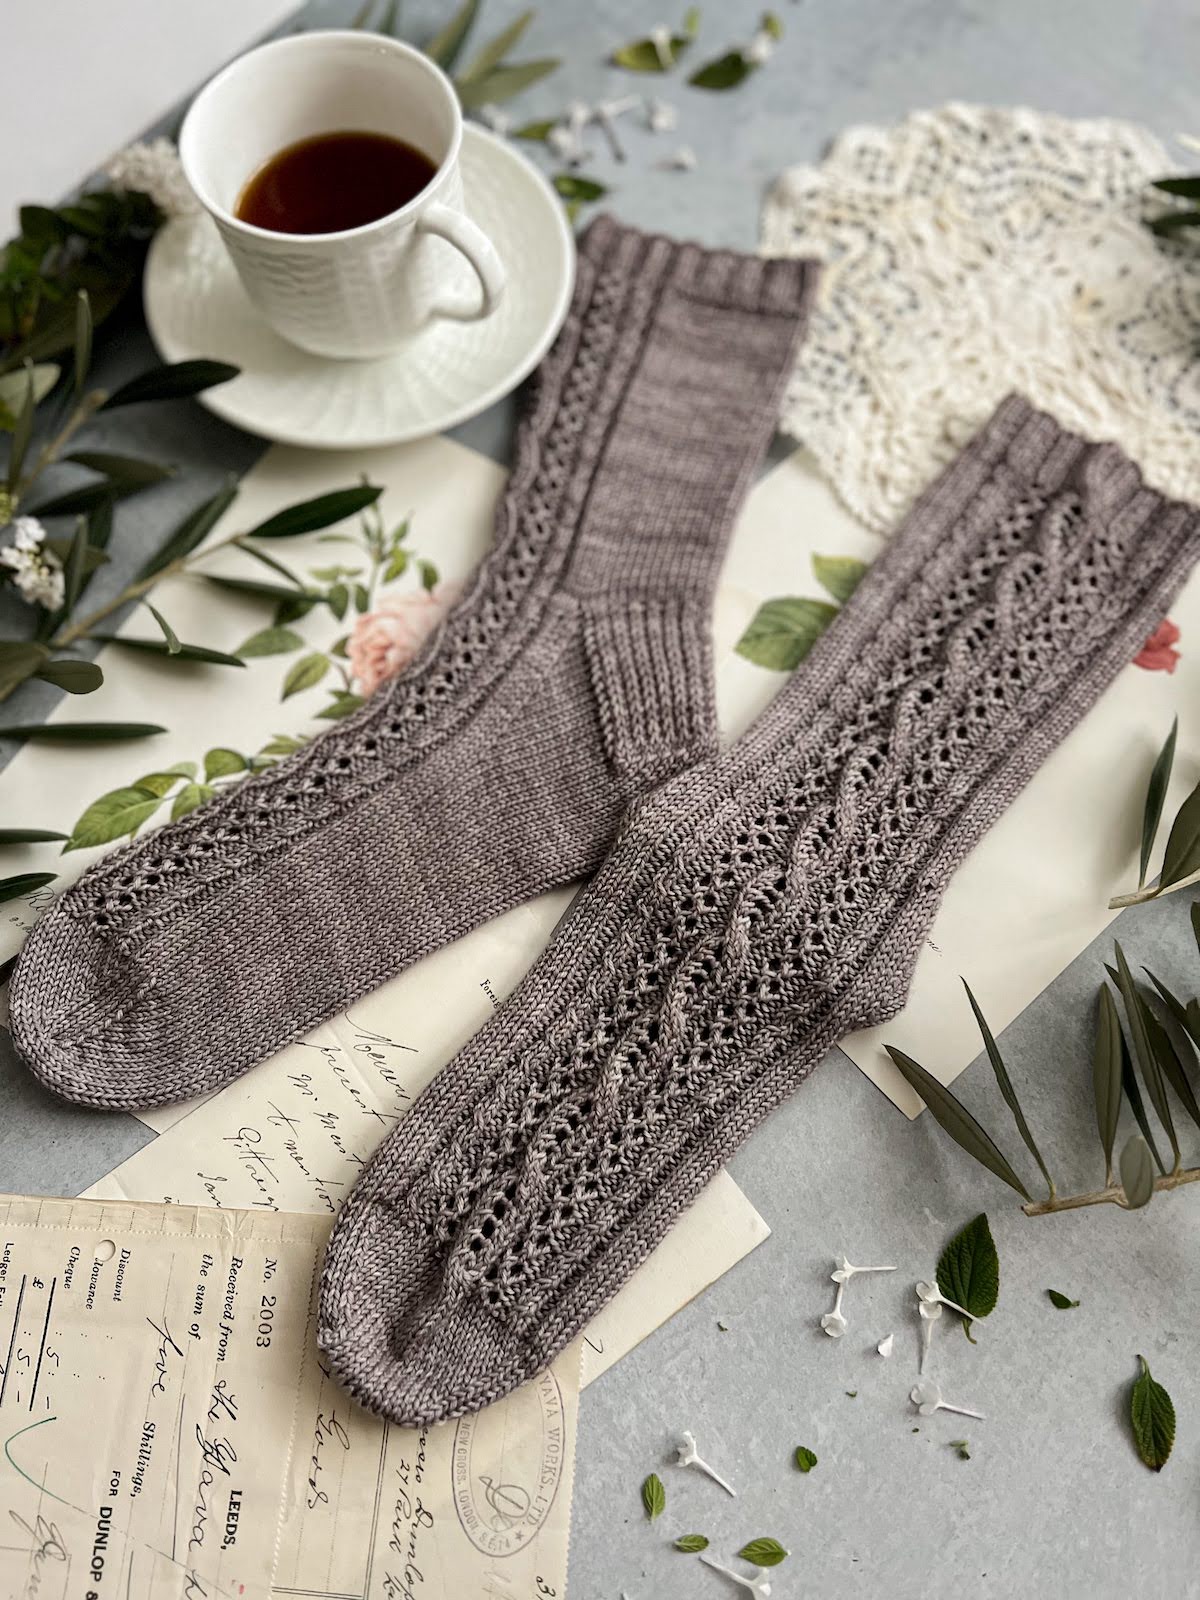 A pair of grayish-purple socks is laid out flat on a gray photo background, surrounded by antique paper ephemera and a white teacup full of espresso. This photo is shot slightly from the left and focuses on the sock that clearly shows the textured panel all the way down from cuff to toe.